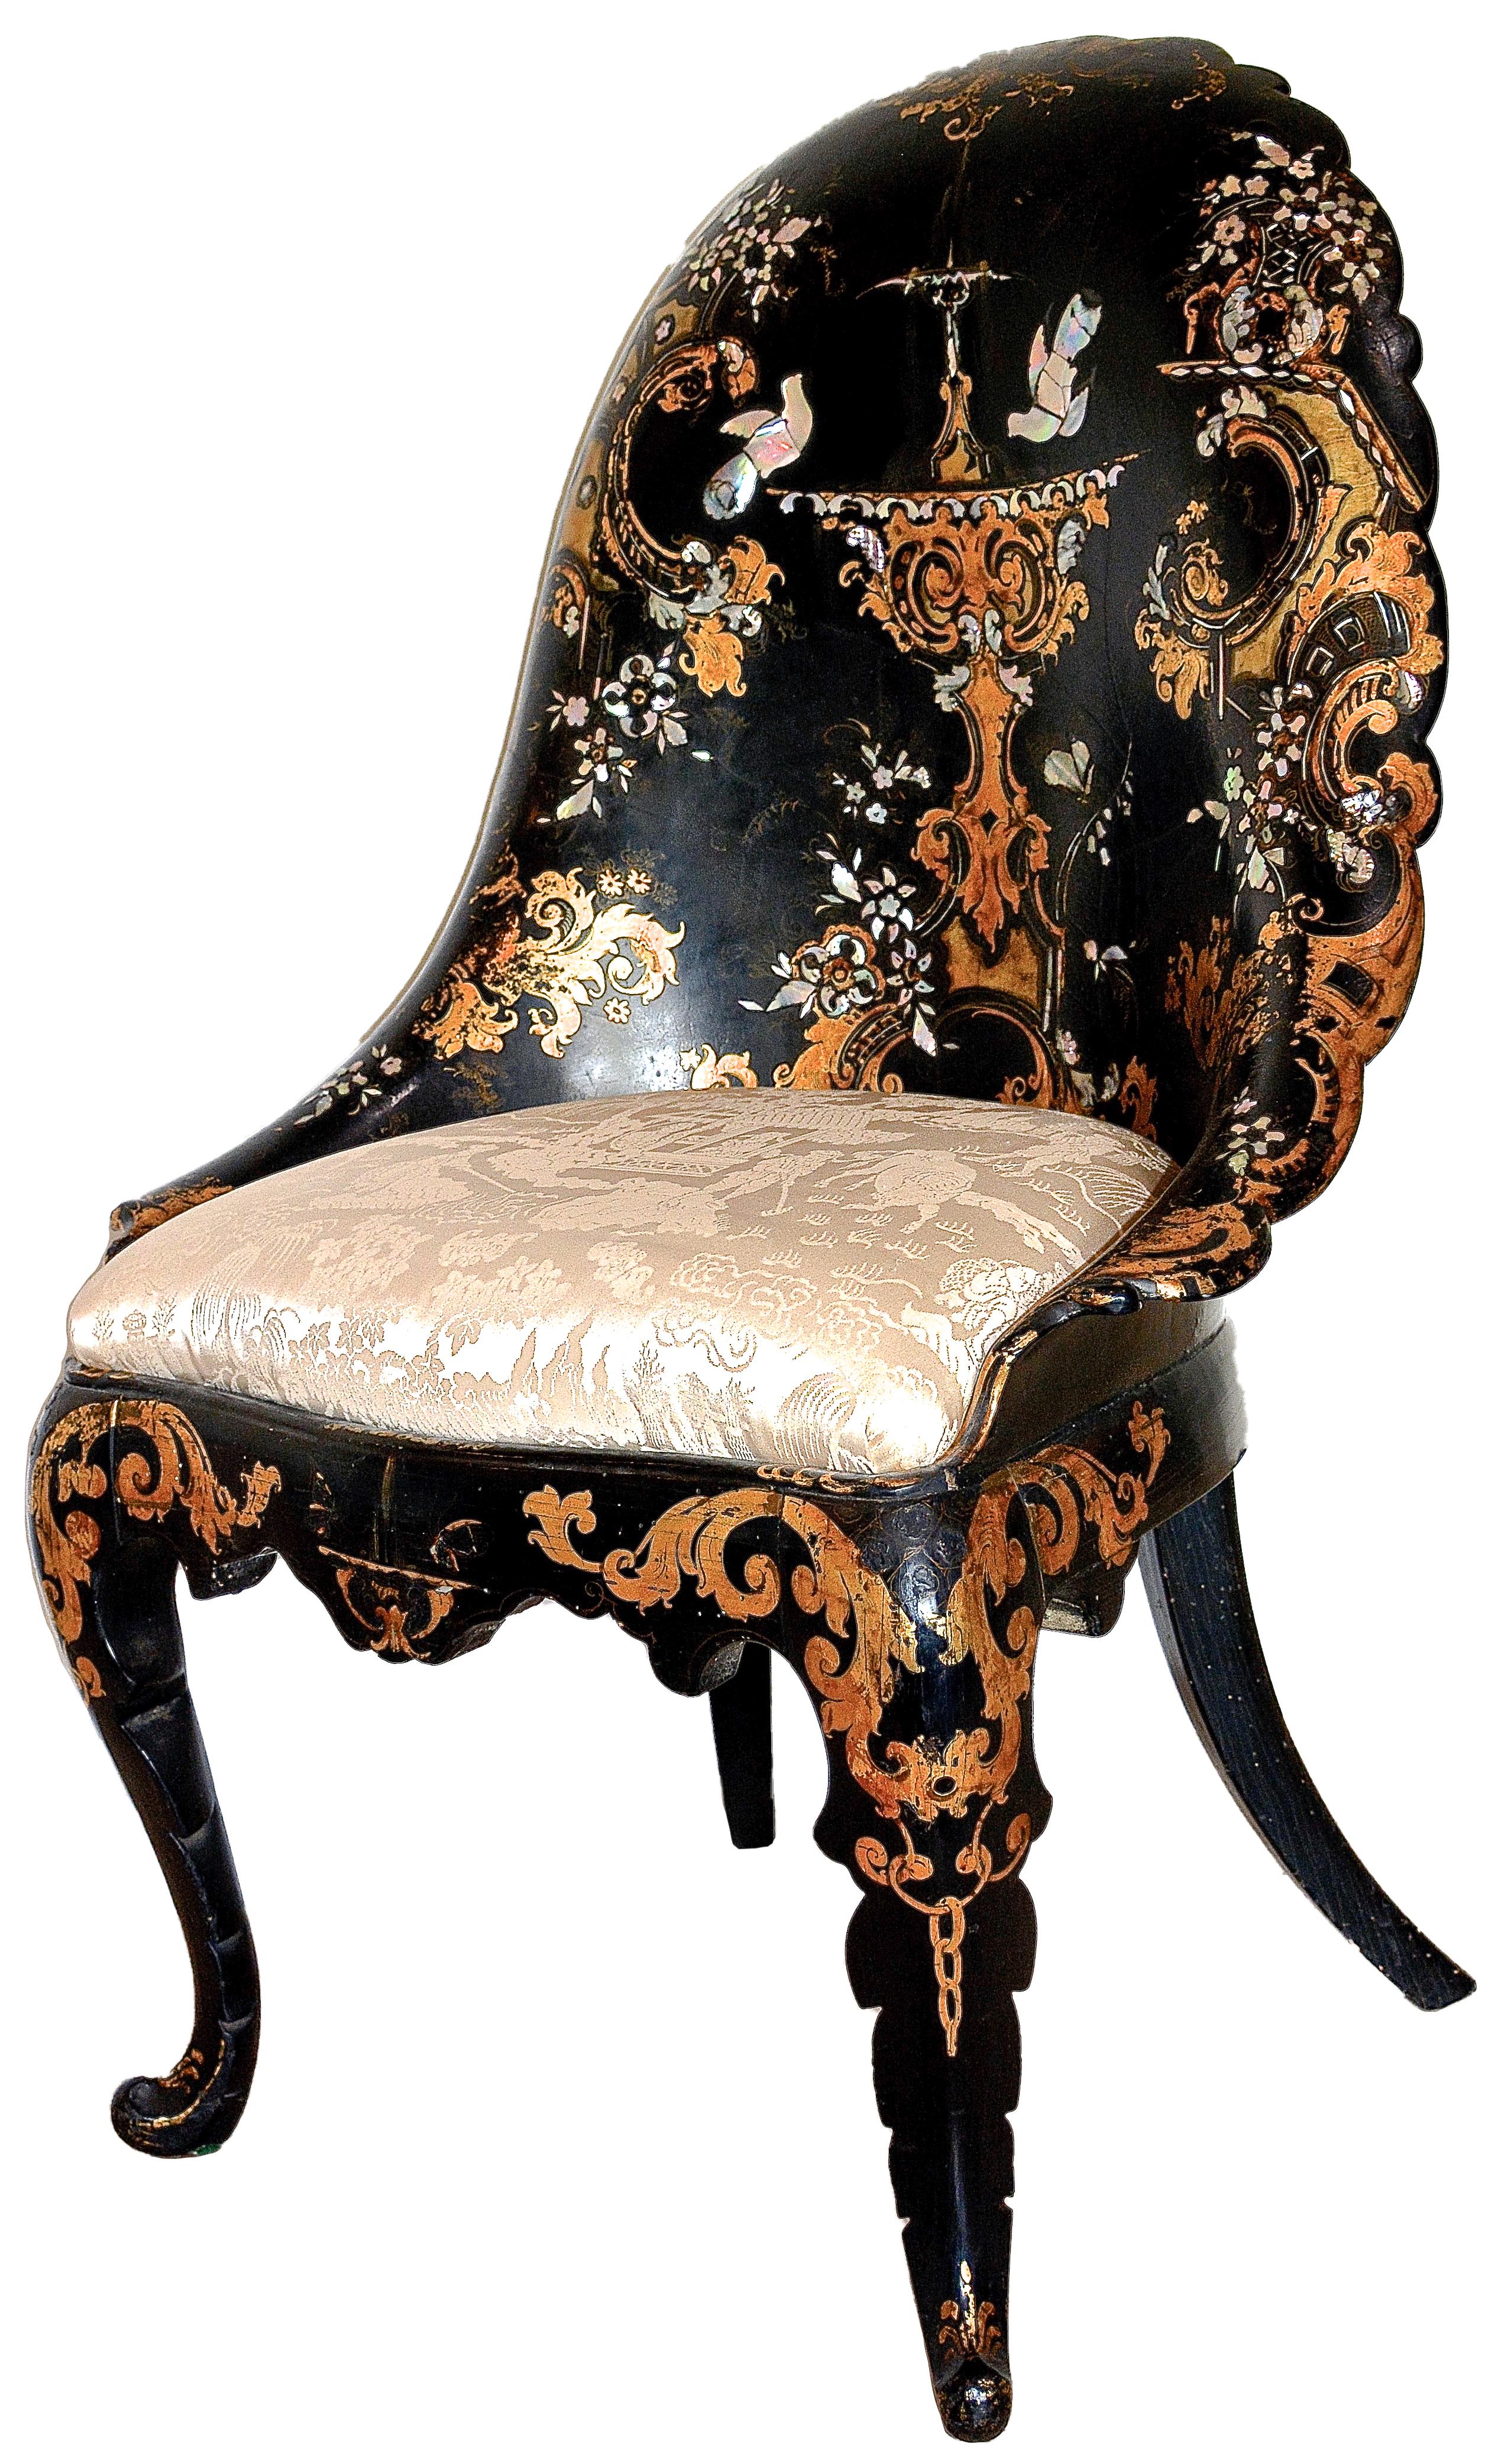 19th Century Victorian Inlaid Mother-of-Pearl & Gold Leaf Papier Mache Chair For Sale 6